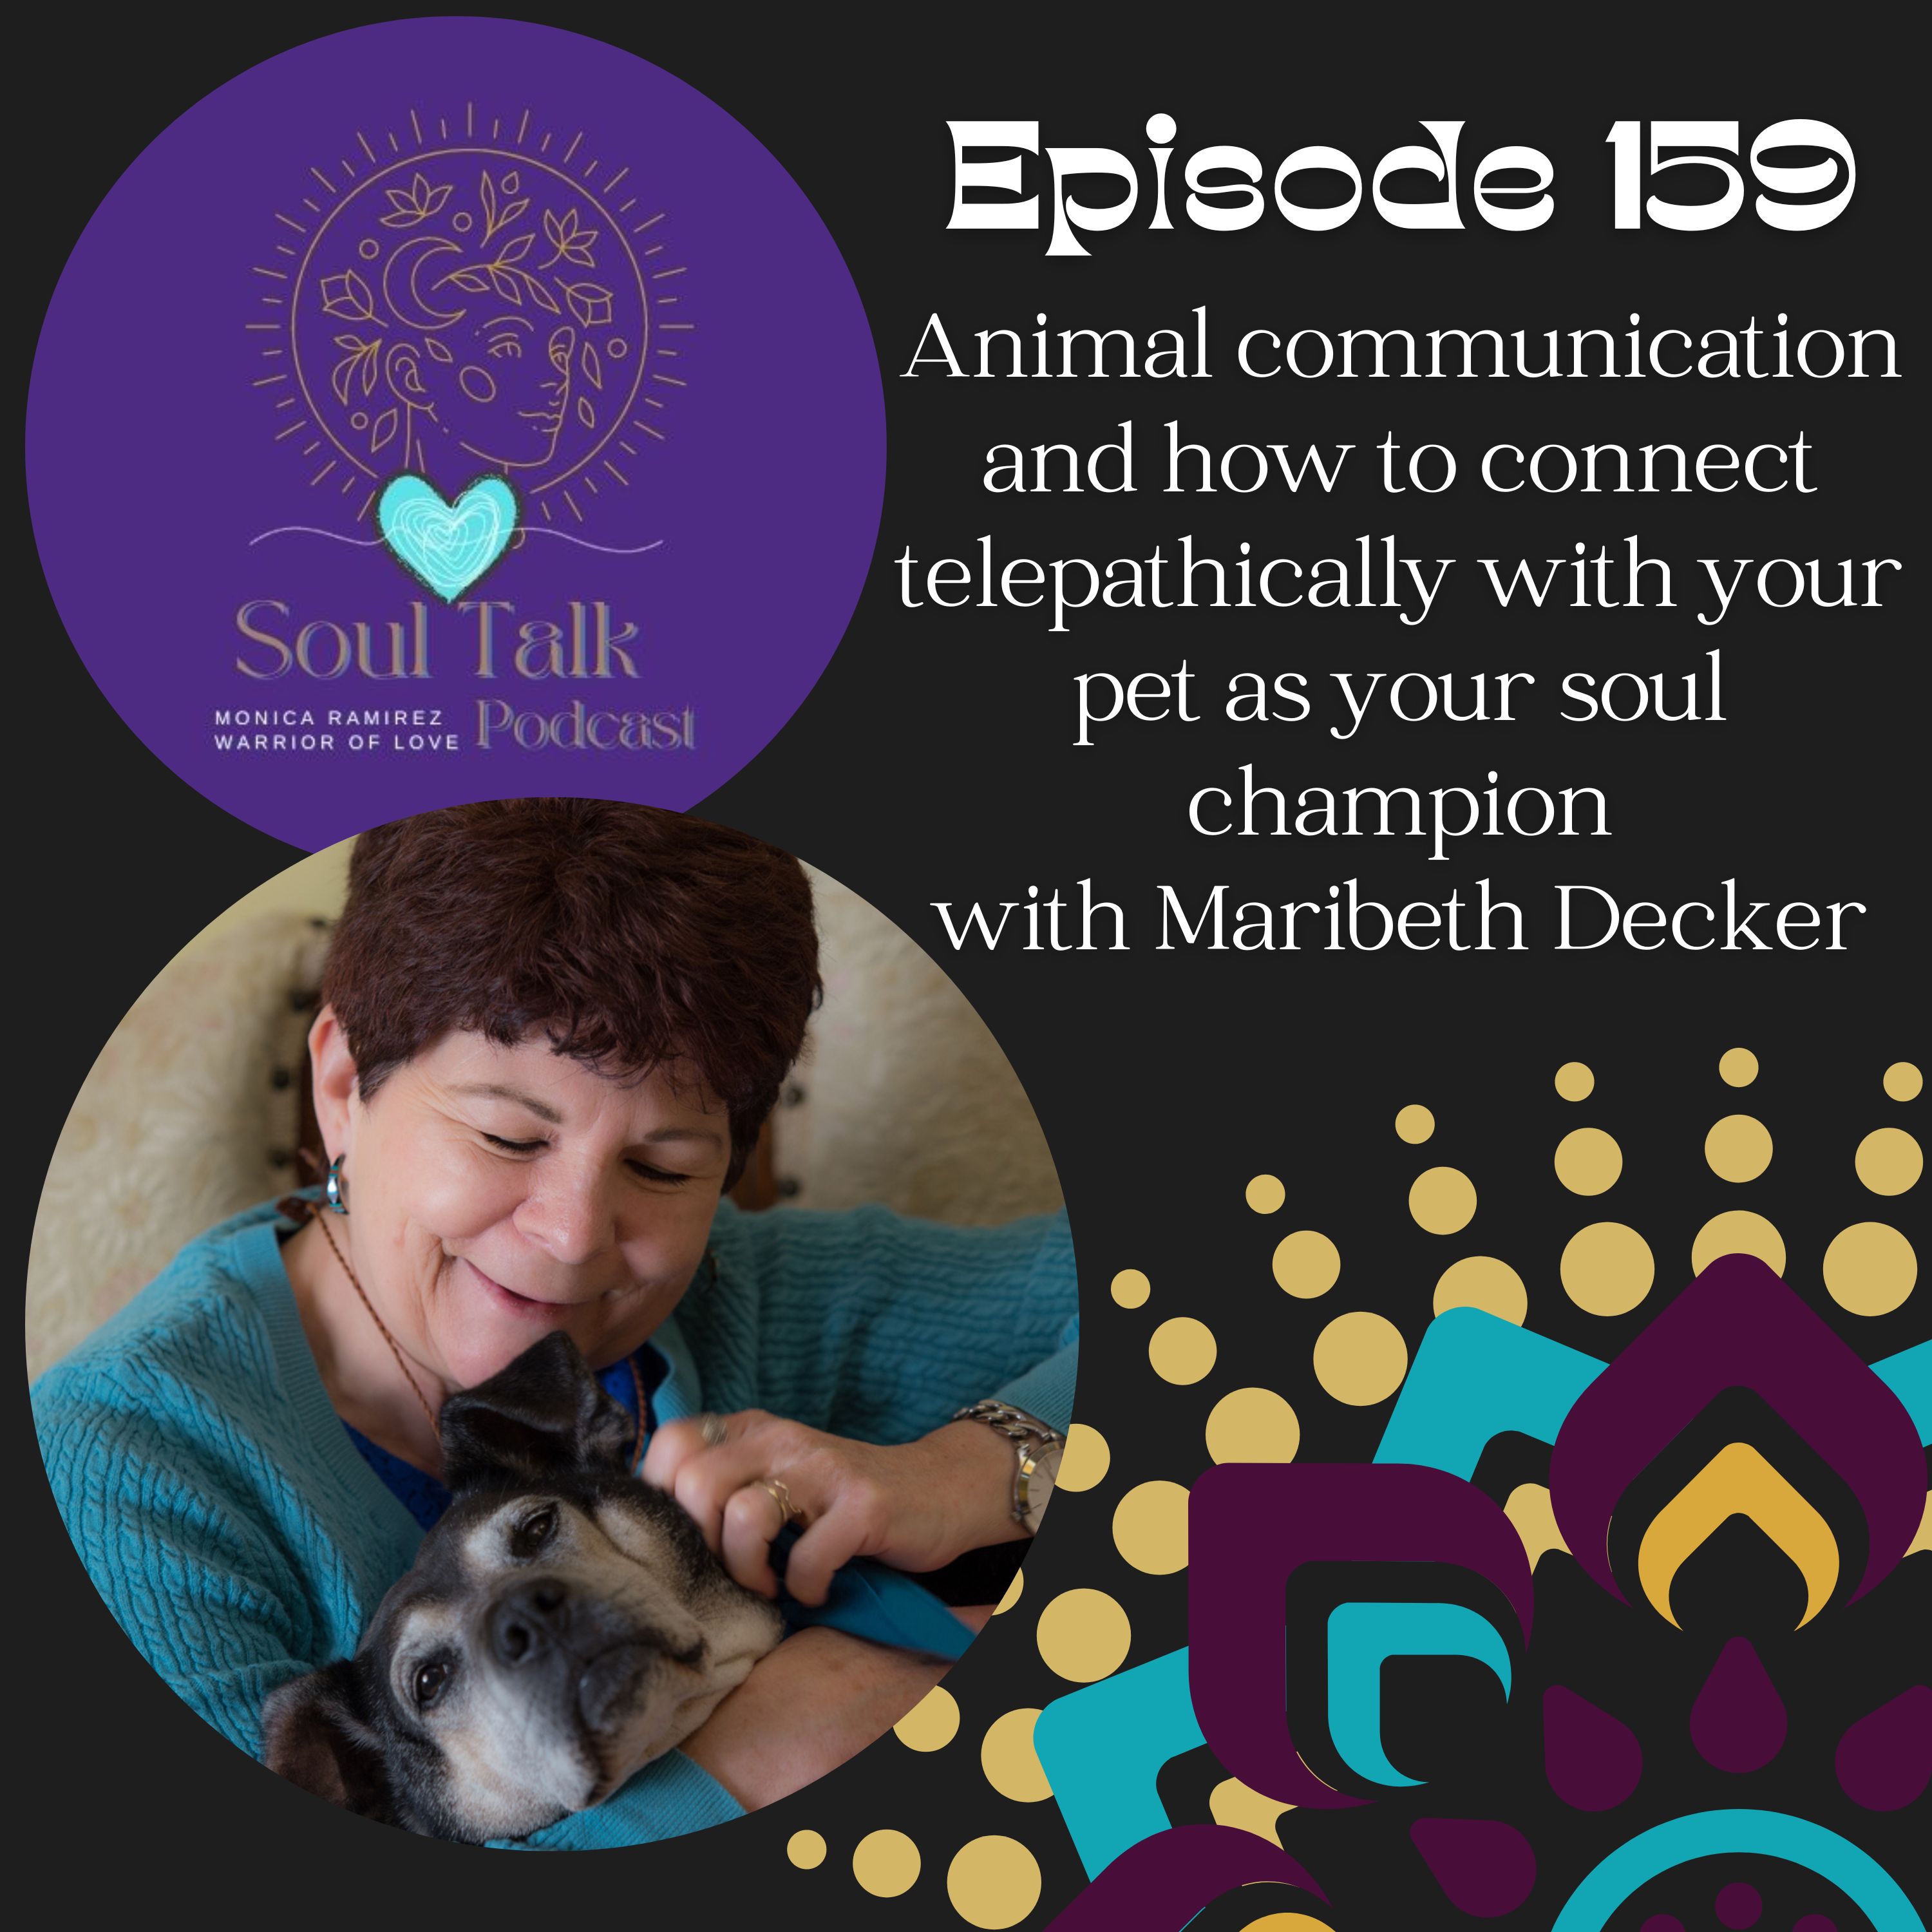 The Soul Talk Episode 159: Animal communication and how to connect telepathically with your pet as your soul champion with Maribeth Decker